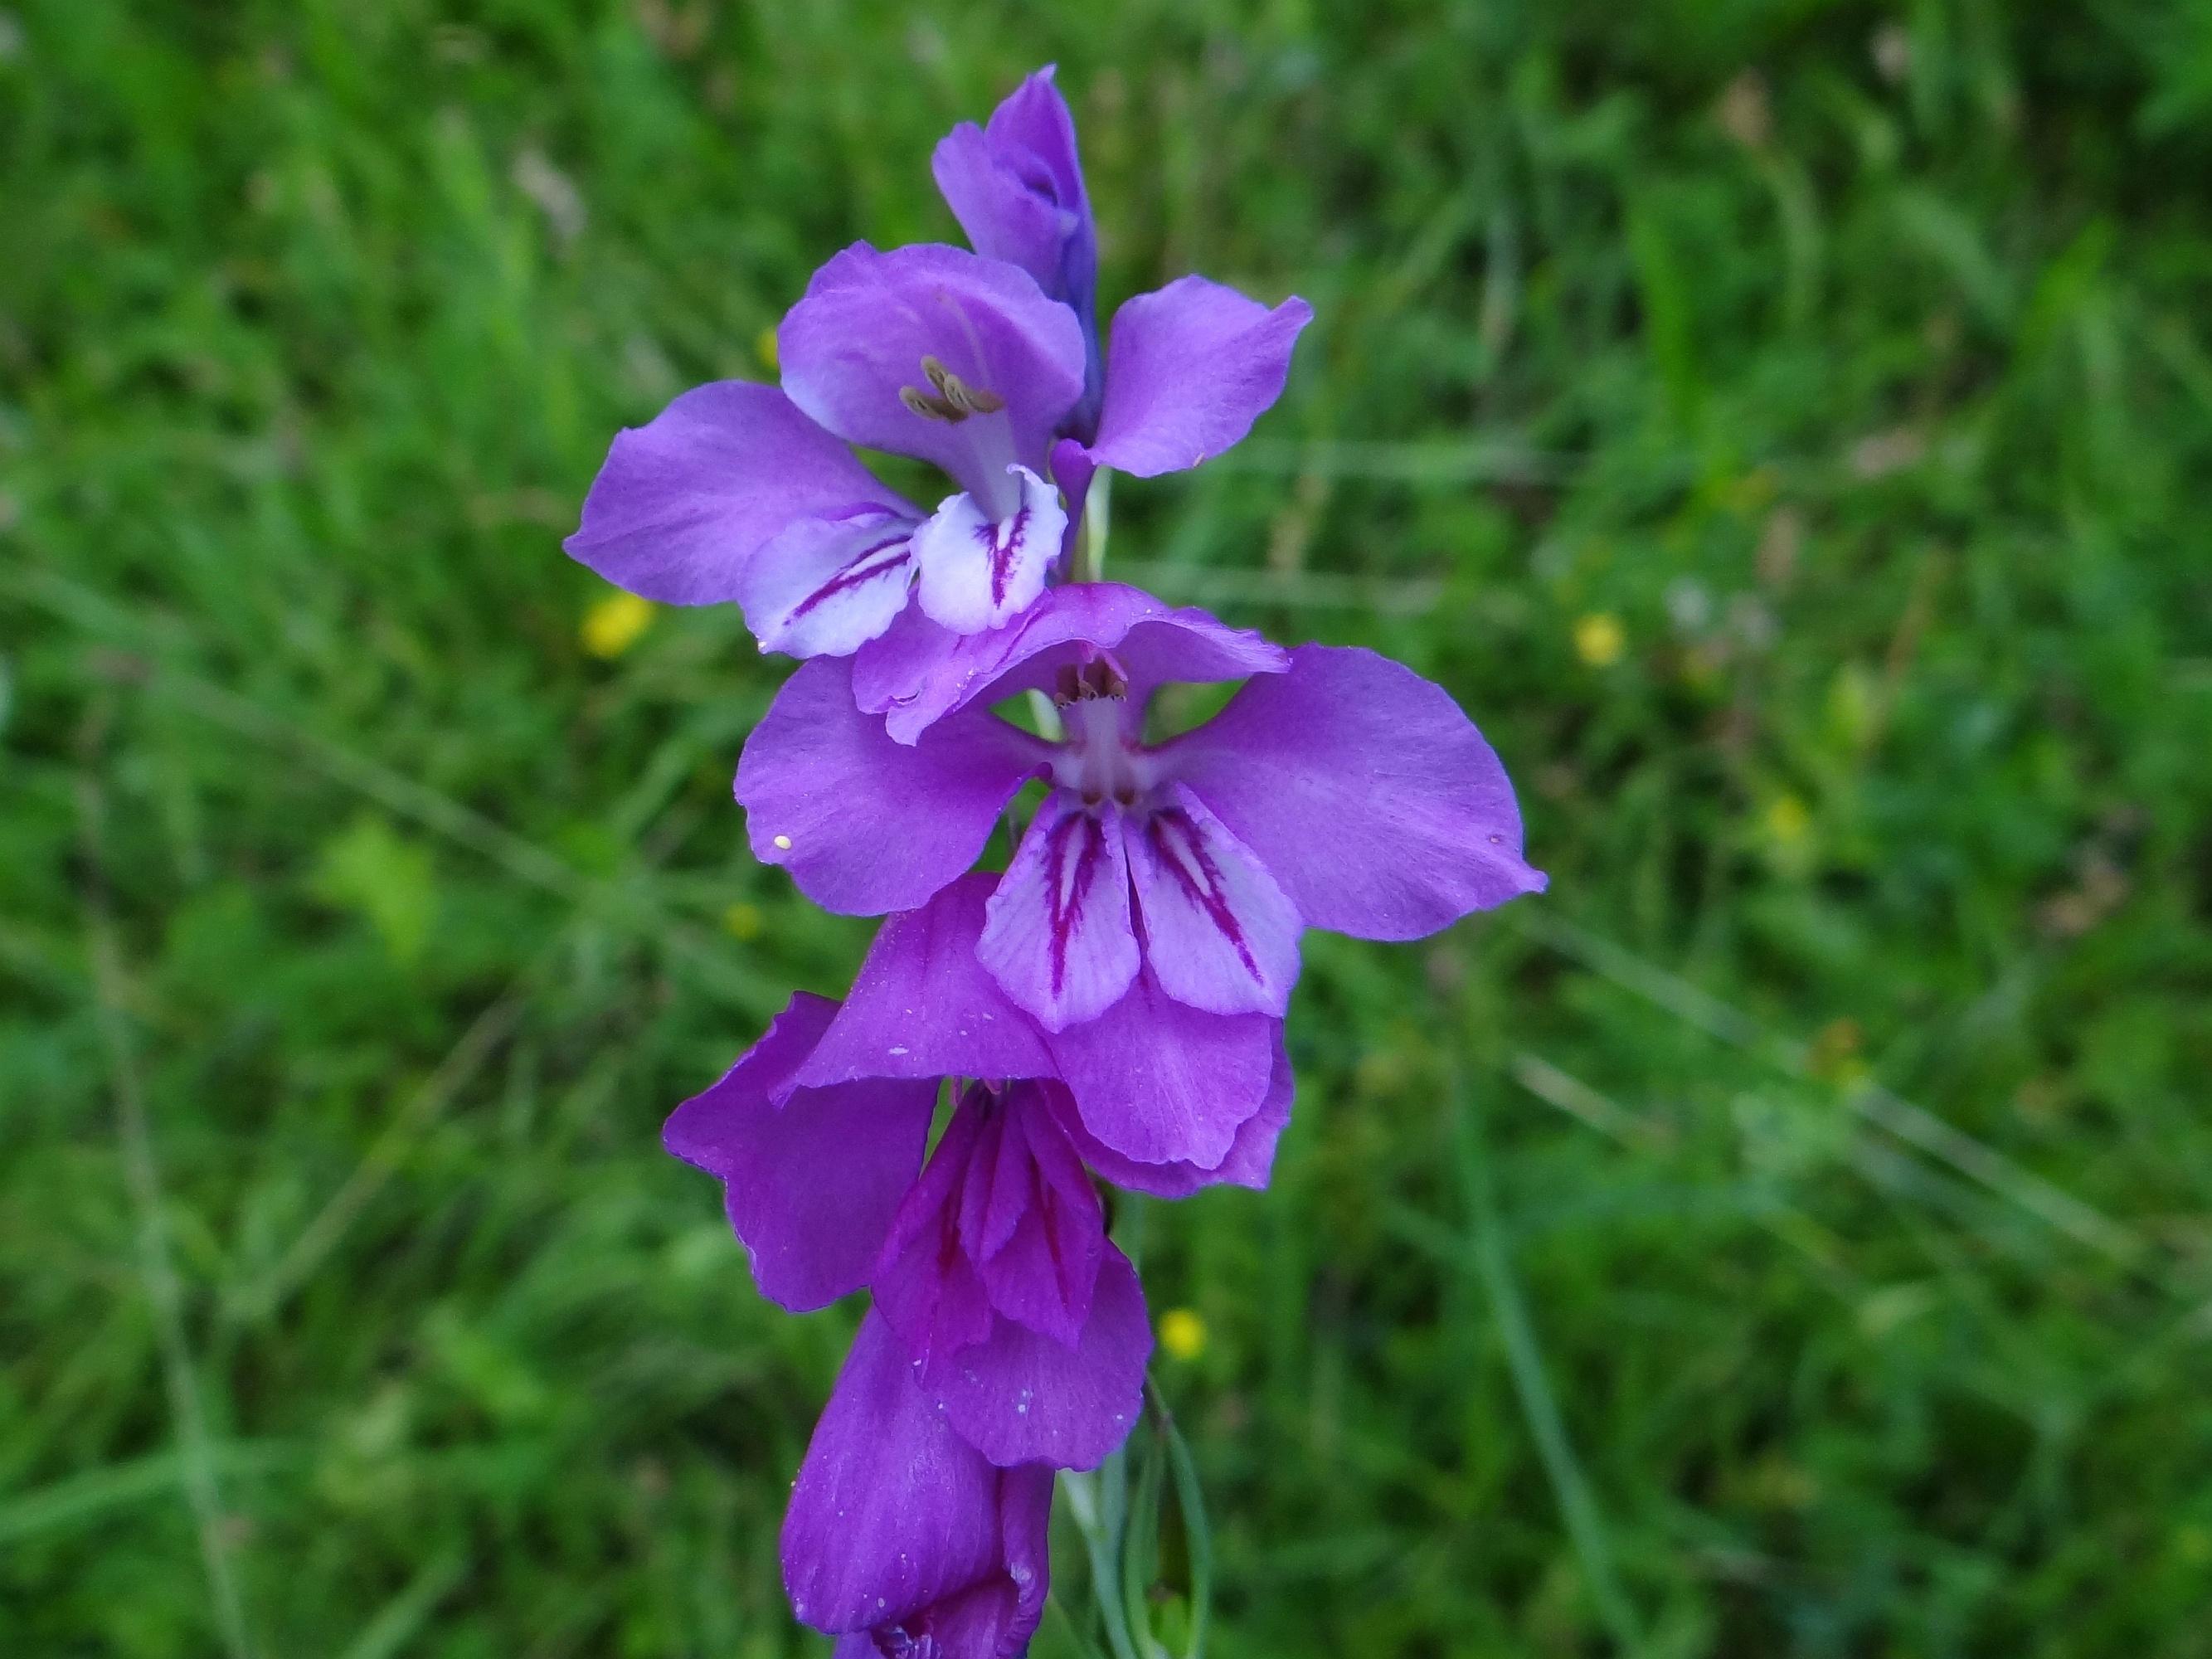 Violet flower with light-gray anthers and green stems